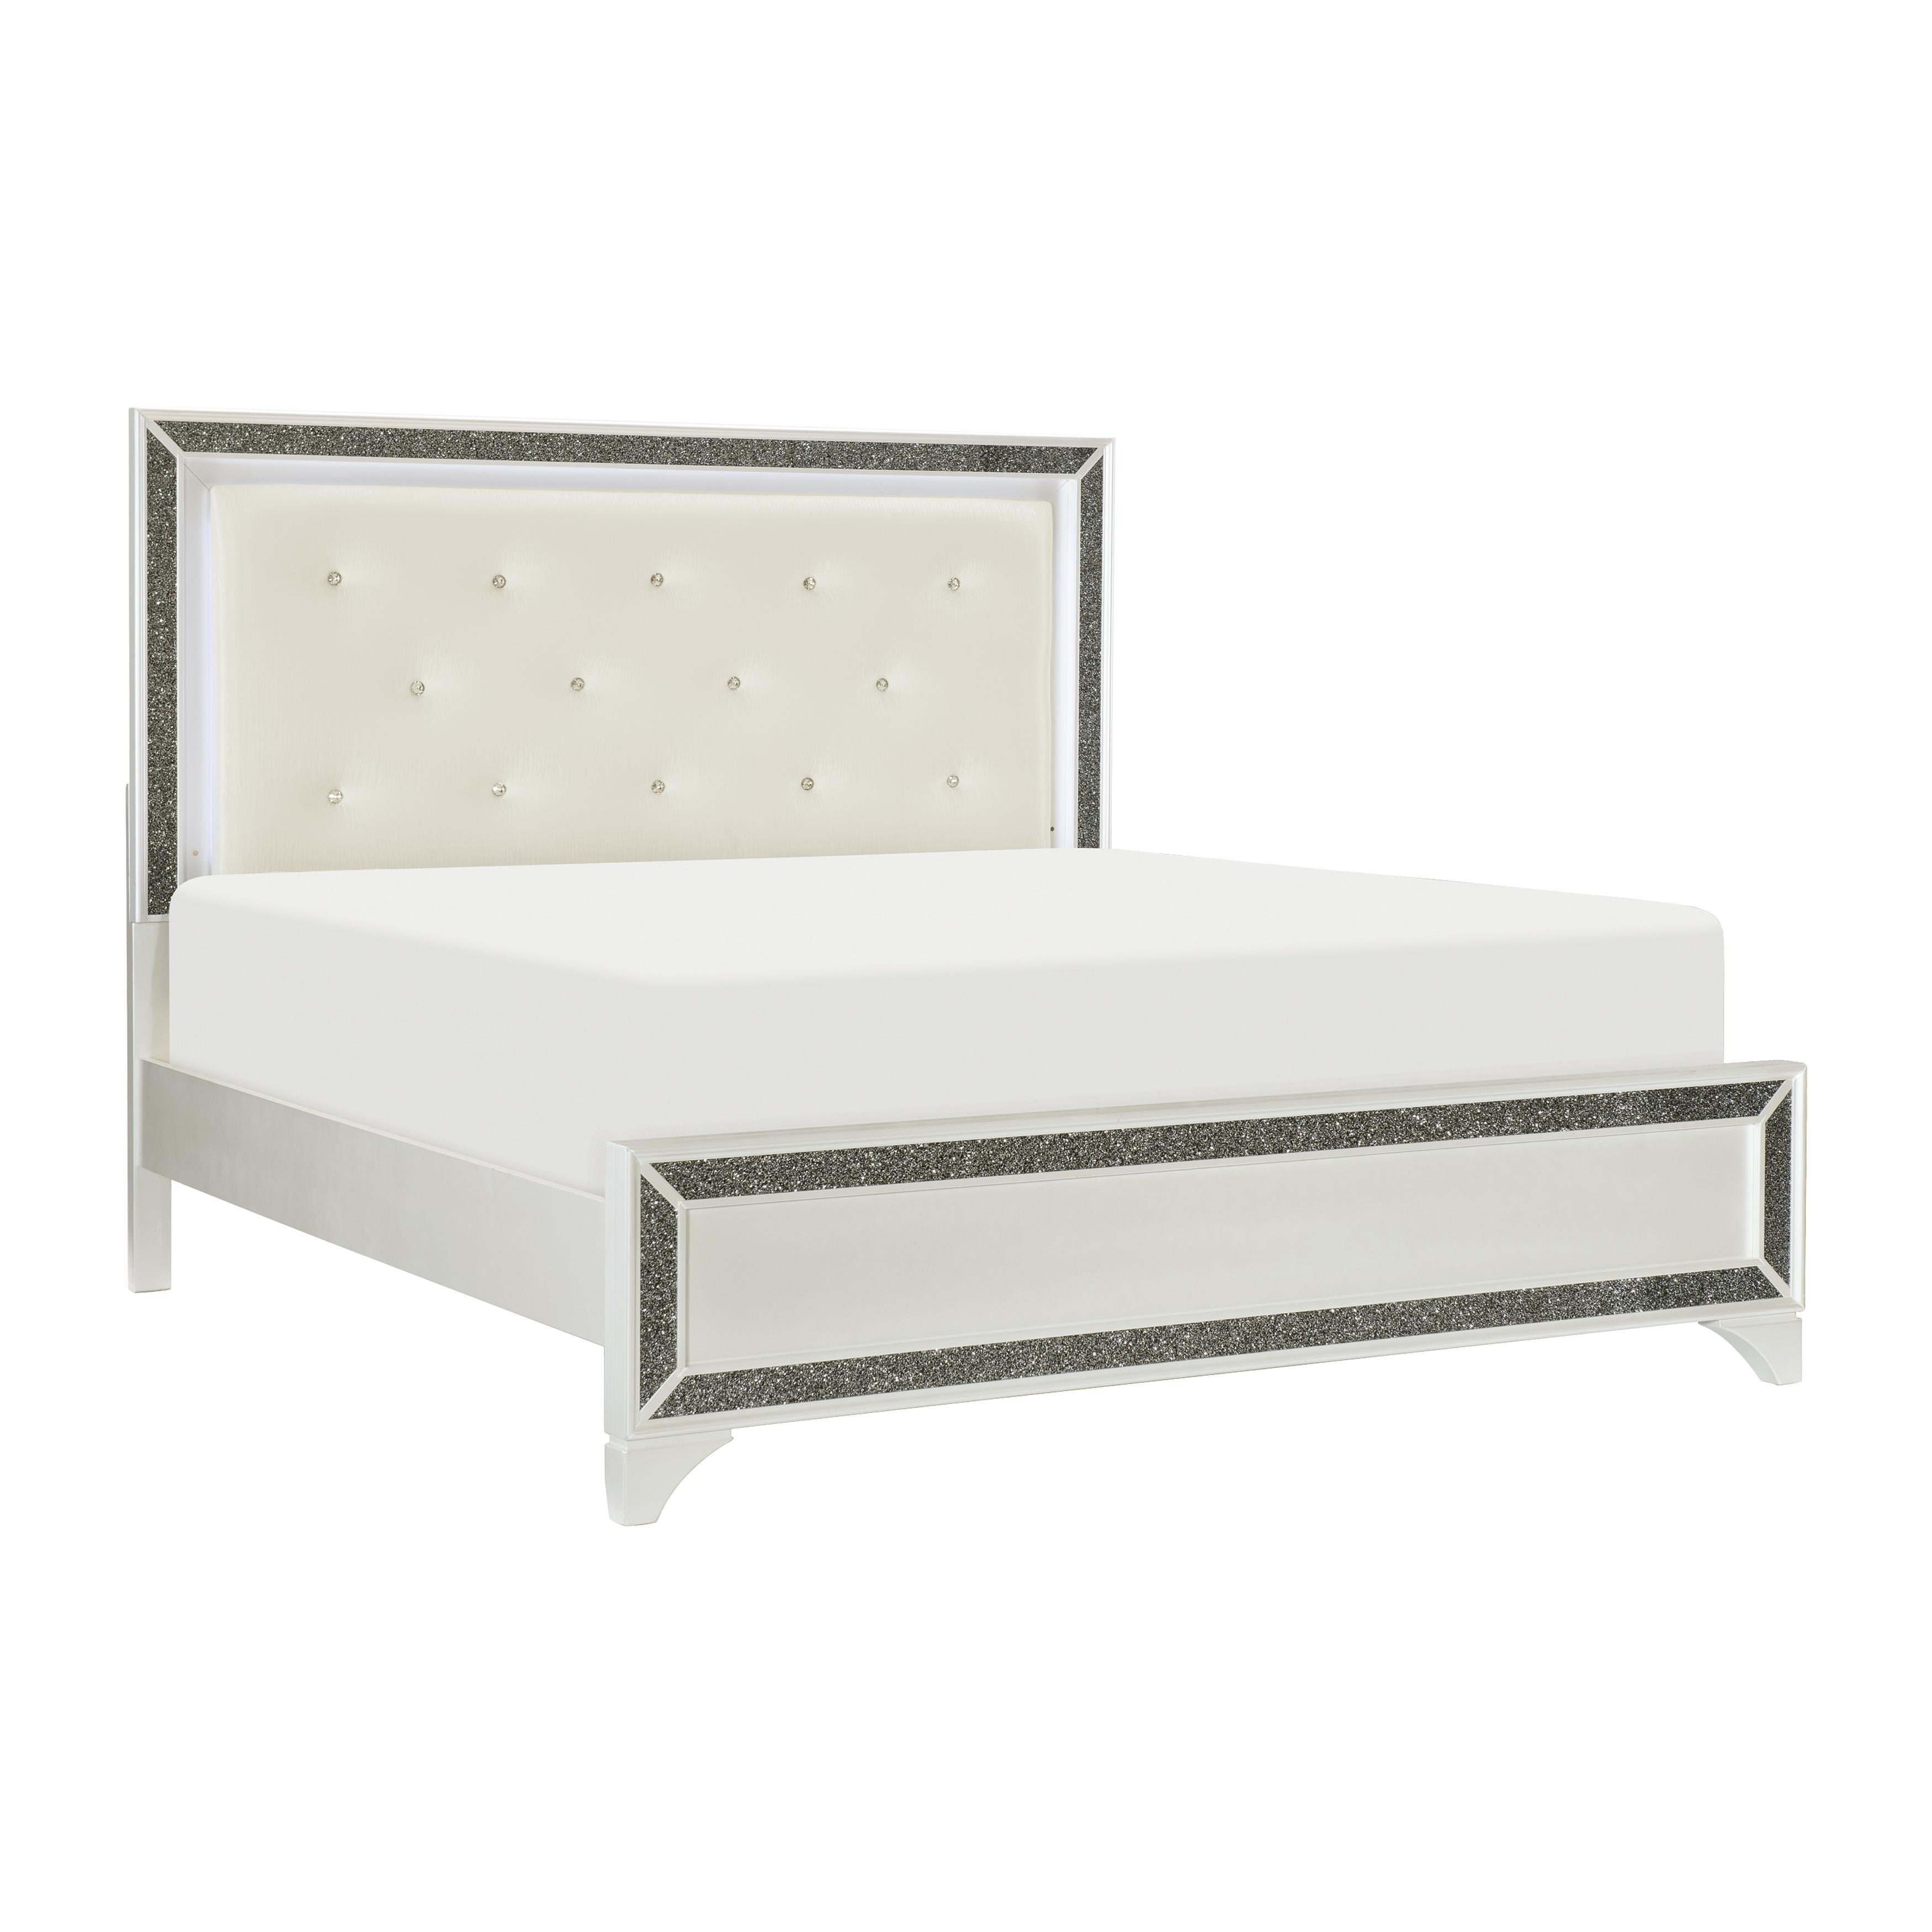 Modern Bed 1572WK-1CK* Salon 1572WK-1CK* in Pearl White Faux Leather